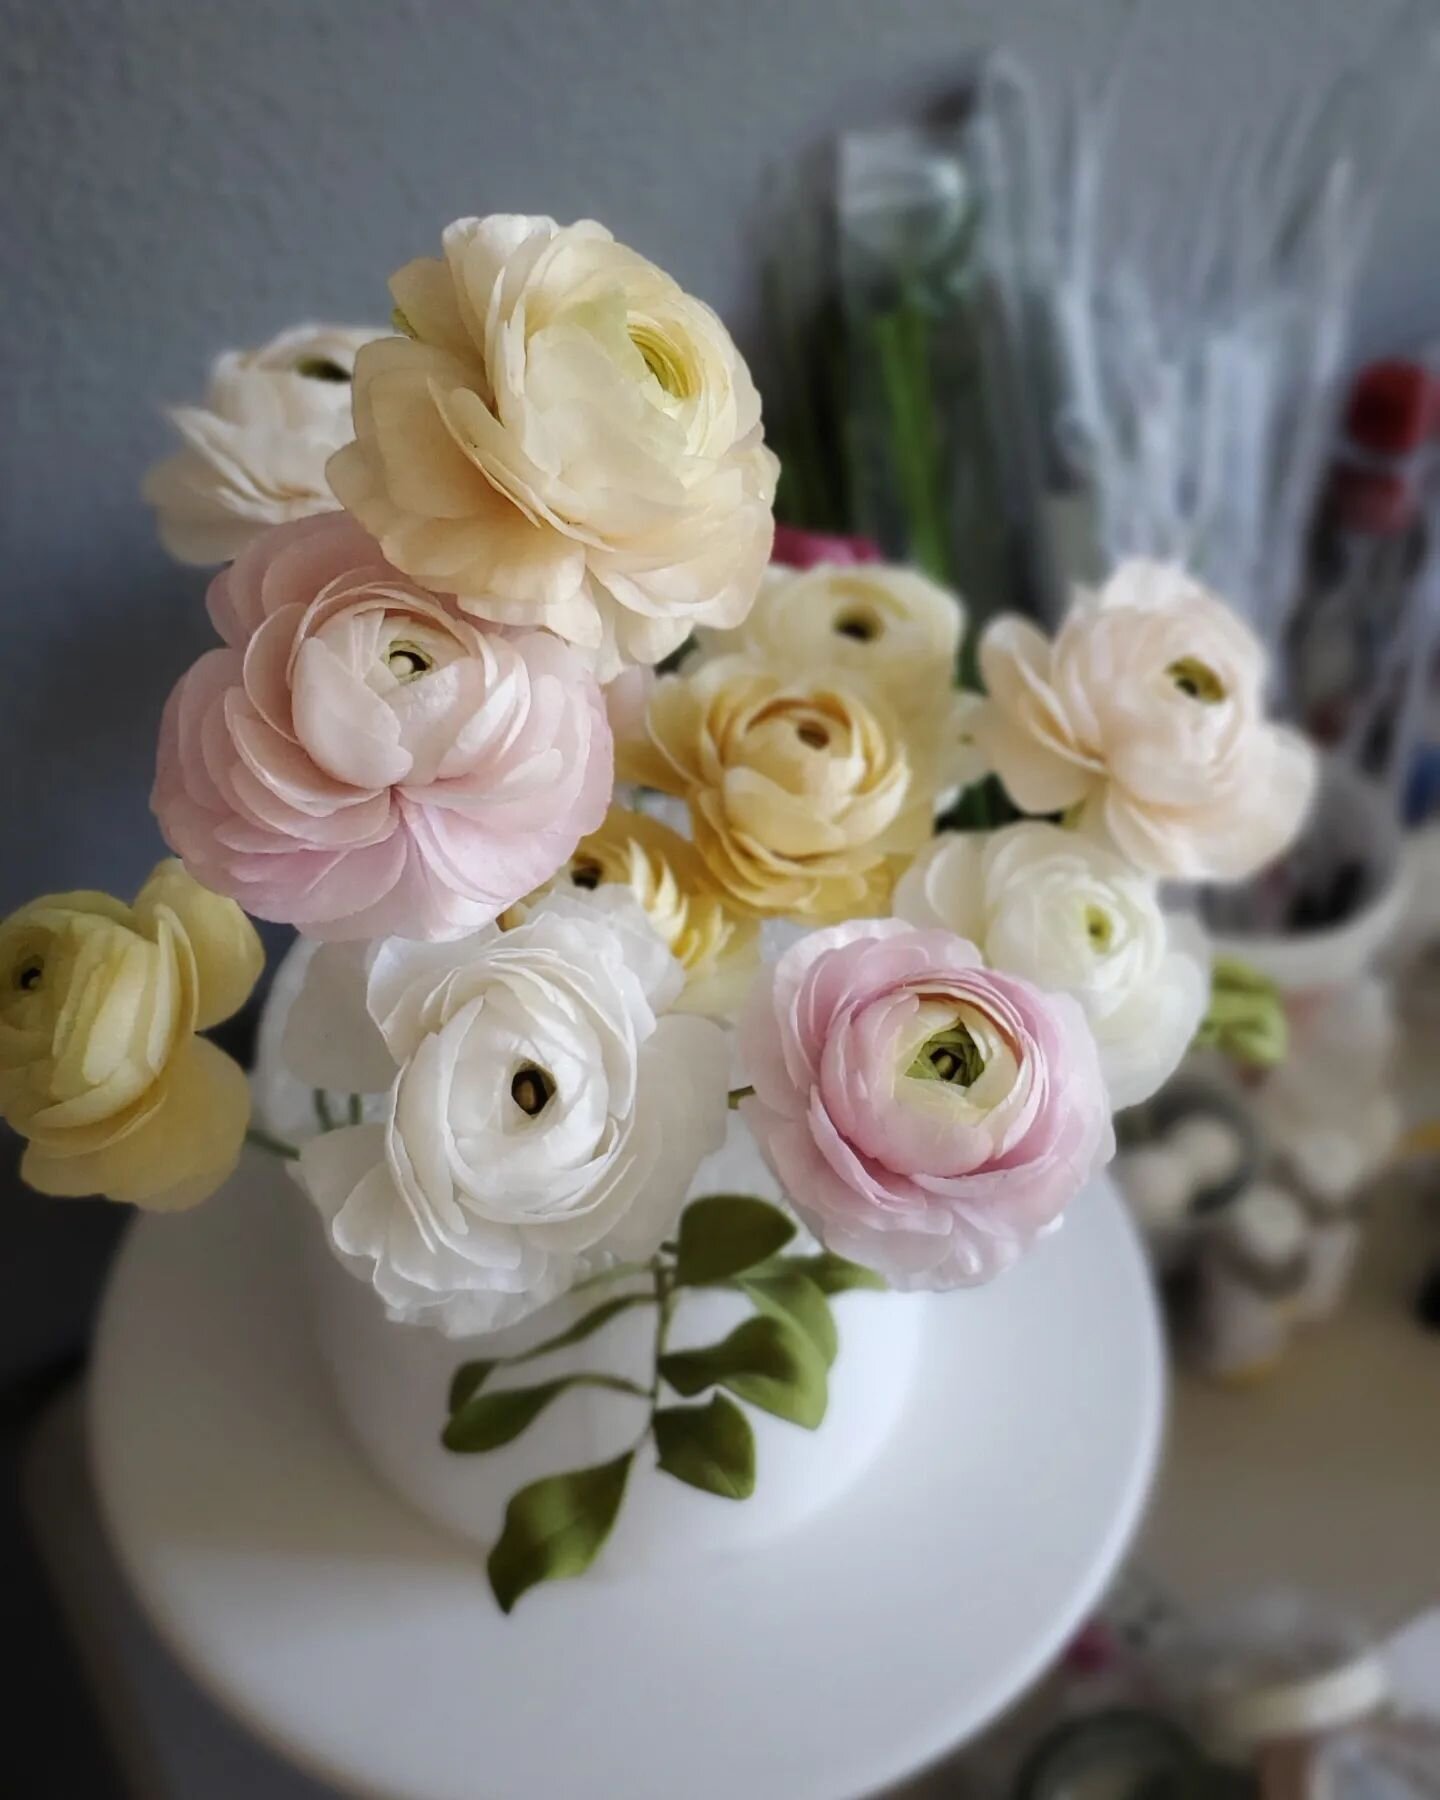 Ranunculus are never a bad choice for #floralfriday, am I right? All made in wafer paper, with a few branches of sugar greenery tucked around. Have a lovely weekend!

#floralfriday #ranunculus #waferpaperranunculus #waferpaperflowers #waferpaperart #